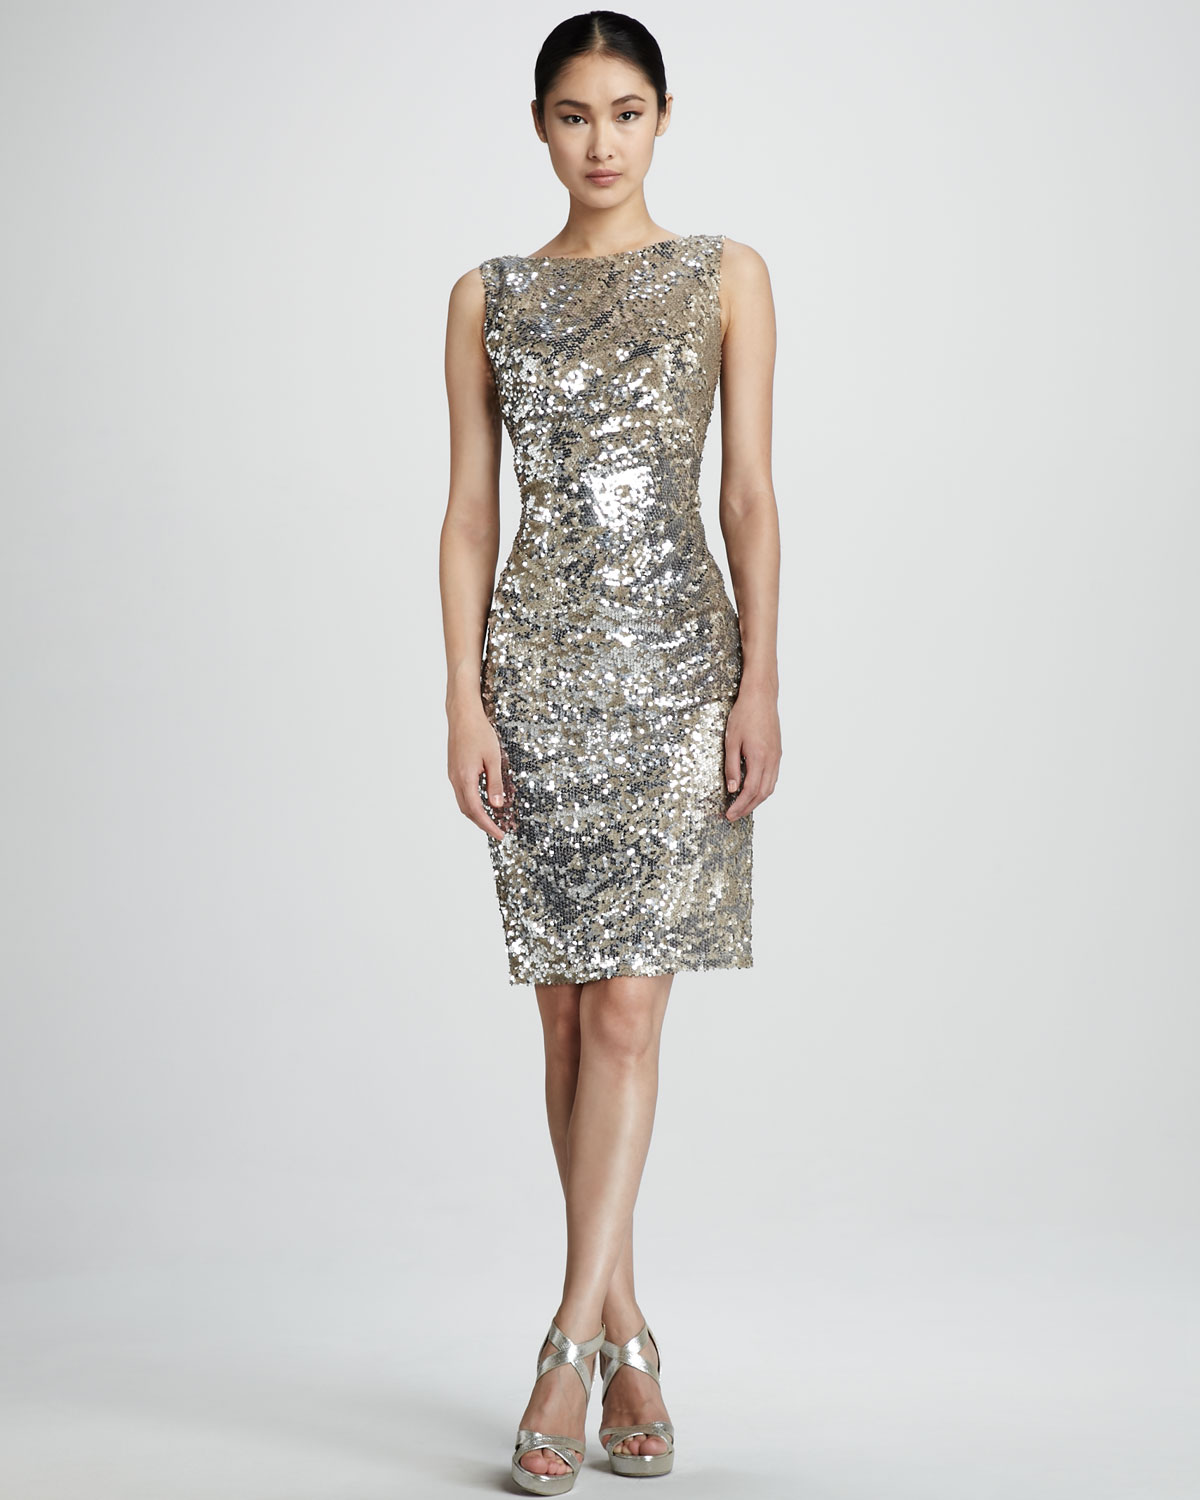 Lyst - David meister Cutout Sequined Cocktail Dress in Metallic